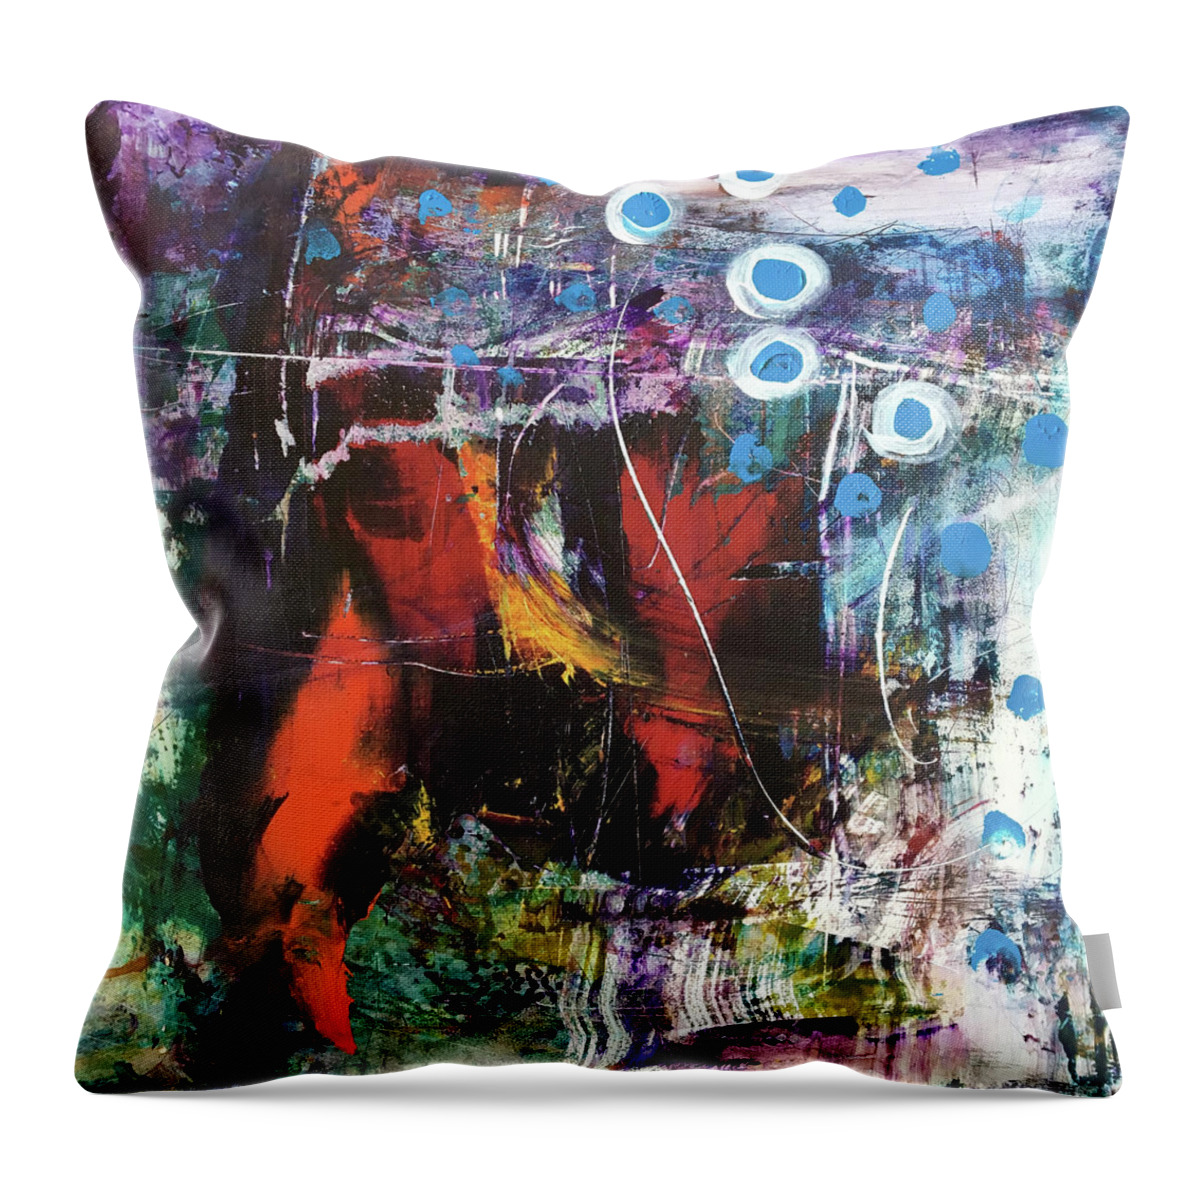 Abstract Art Throw Pillow featuring the painting You Will See by Rodney Frederickson